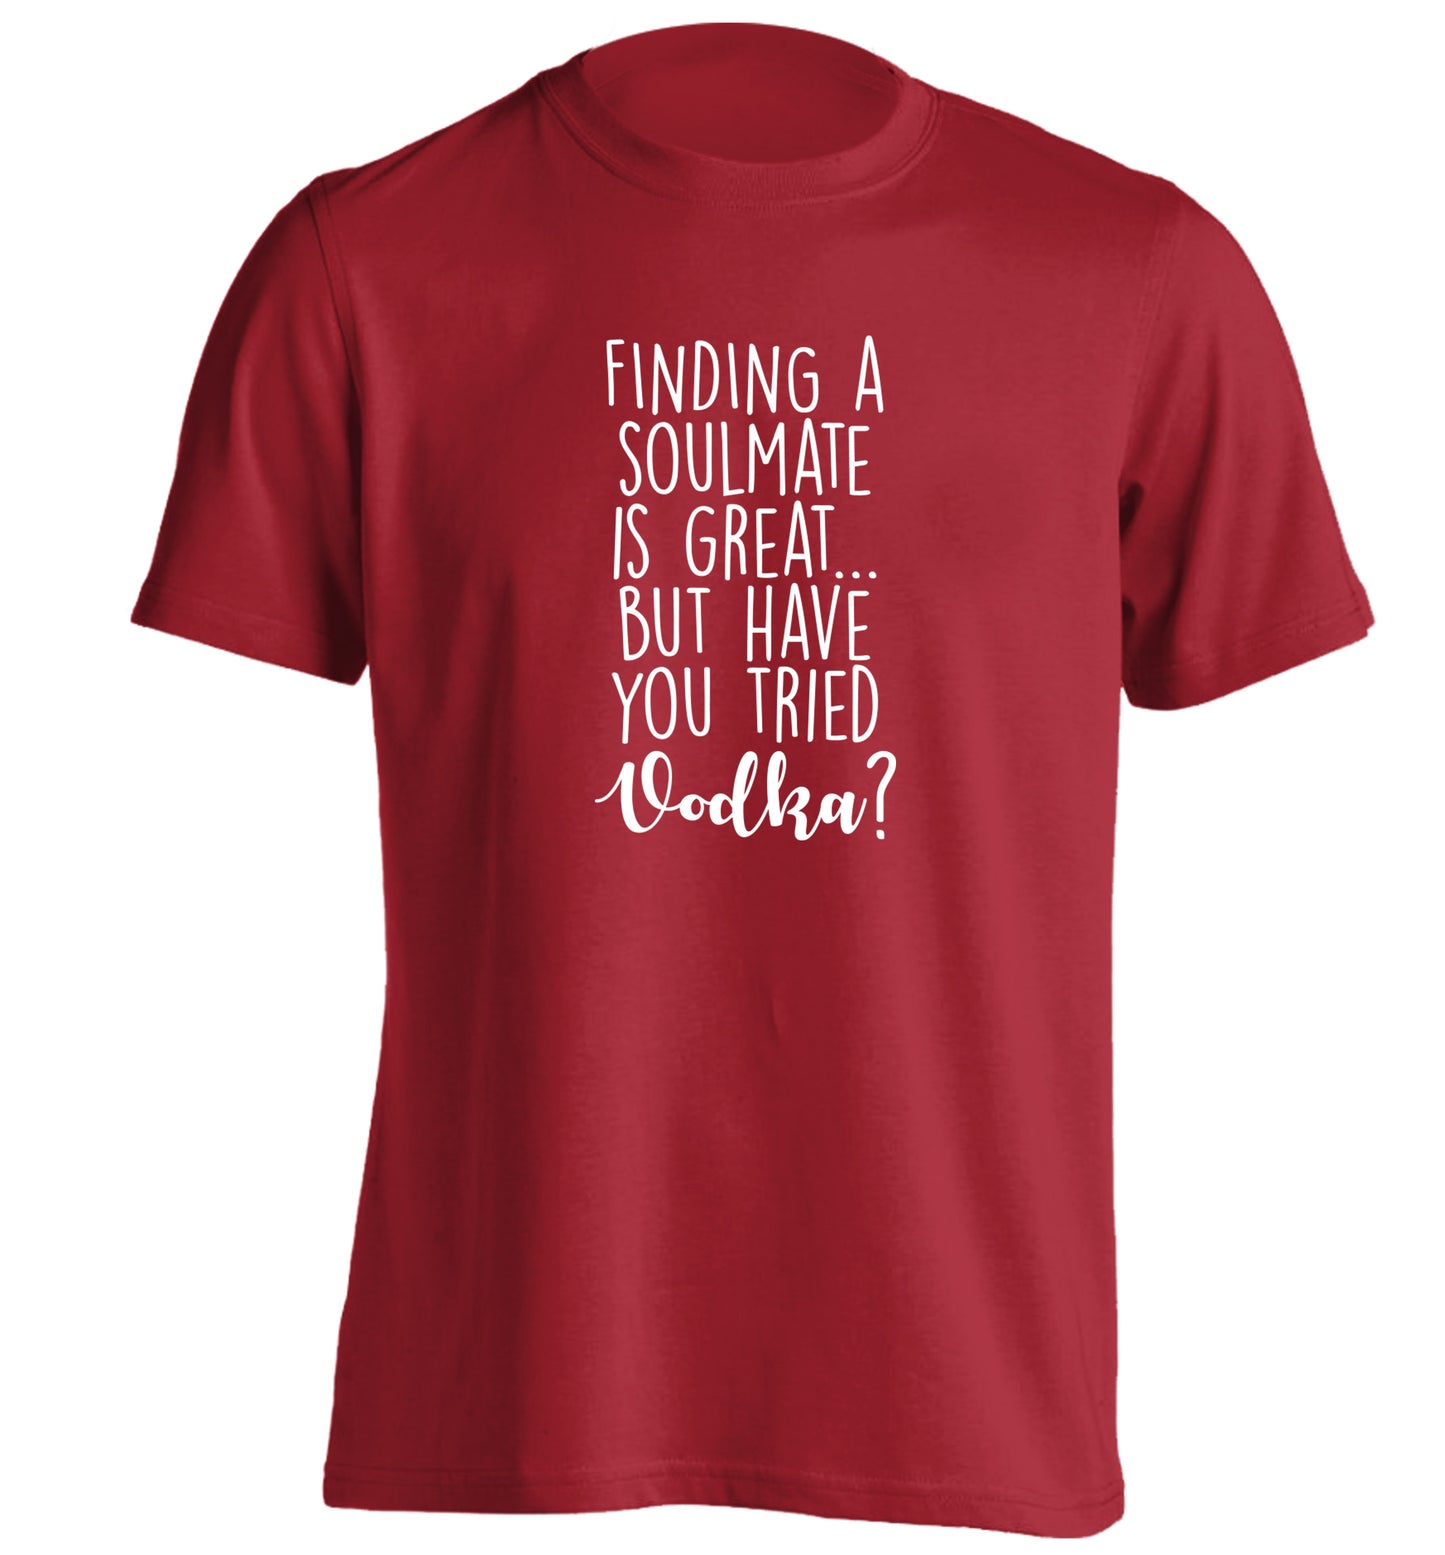 Finding a soulmate is great but have you tried vodka? adults unisex red Tshirt 2XL